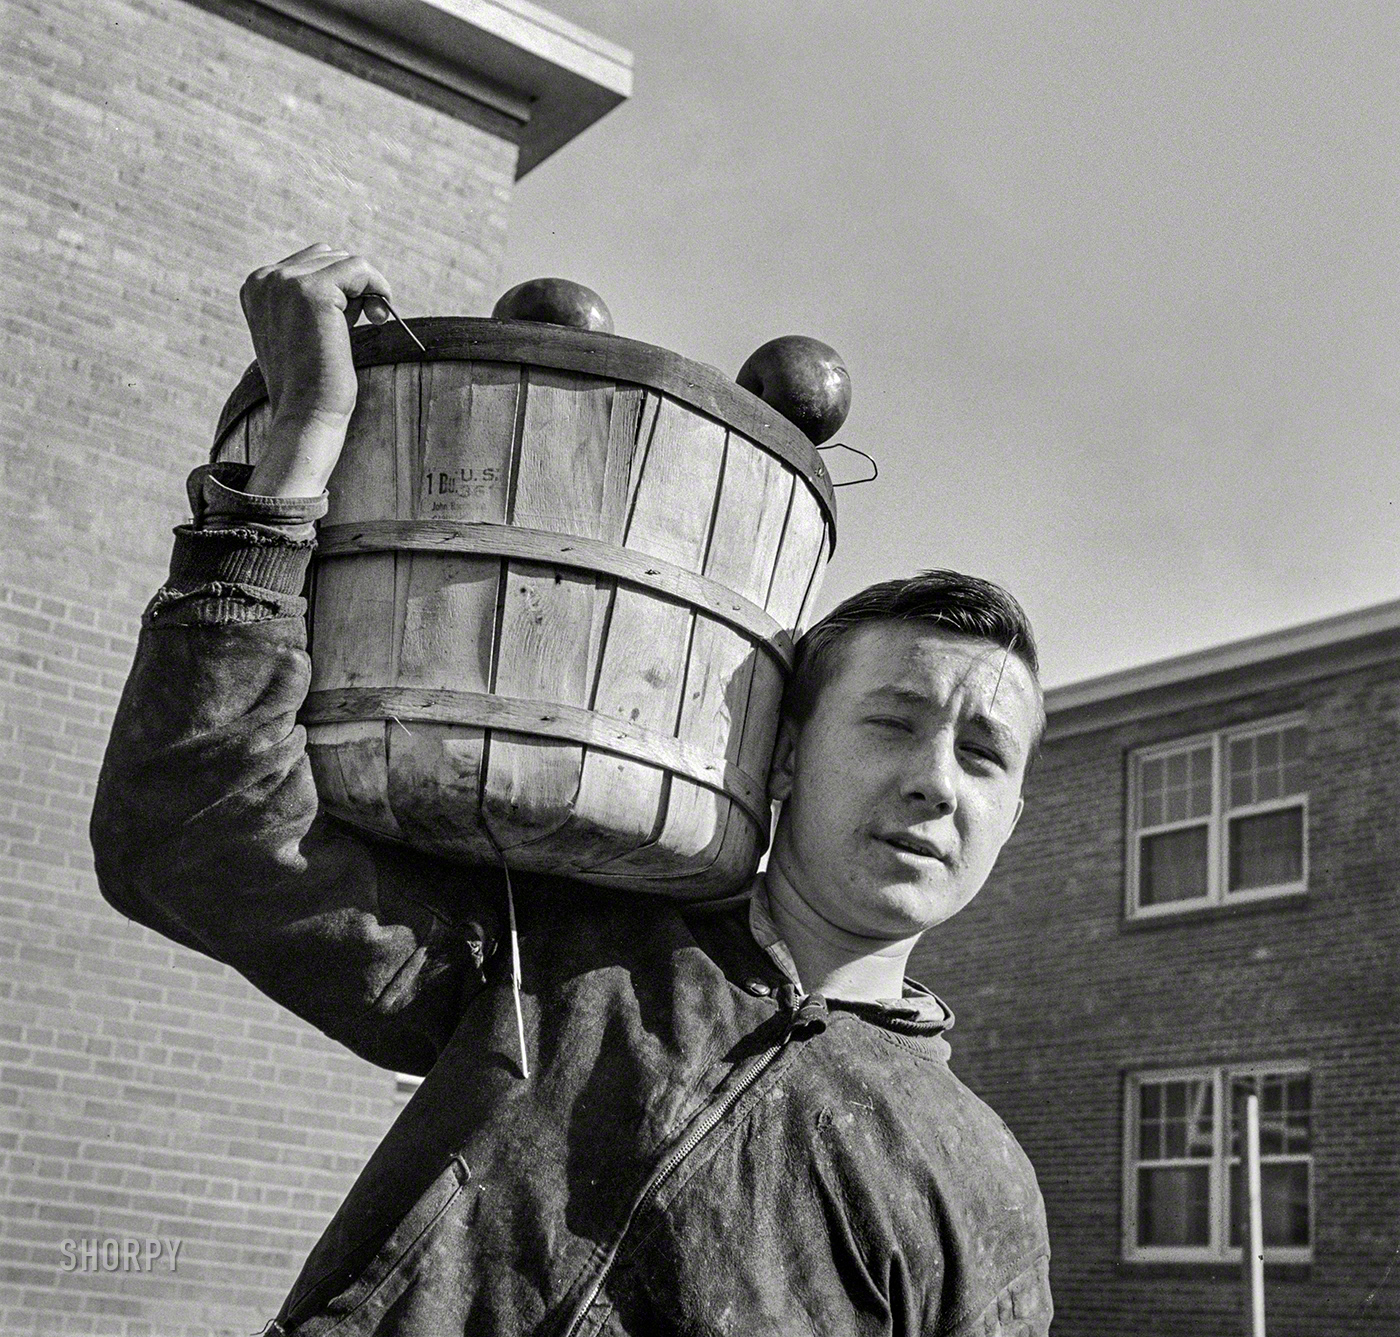 November 1942. Washington, D.C. "Young huckster in the Southwest section." Photo by Gordon Parks for the Office of War Information. View full size.